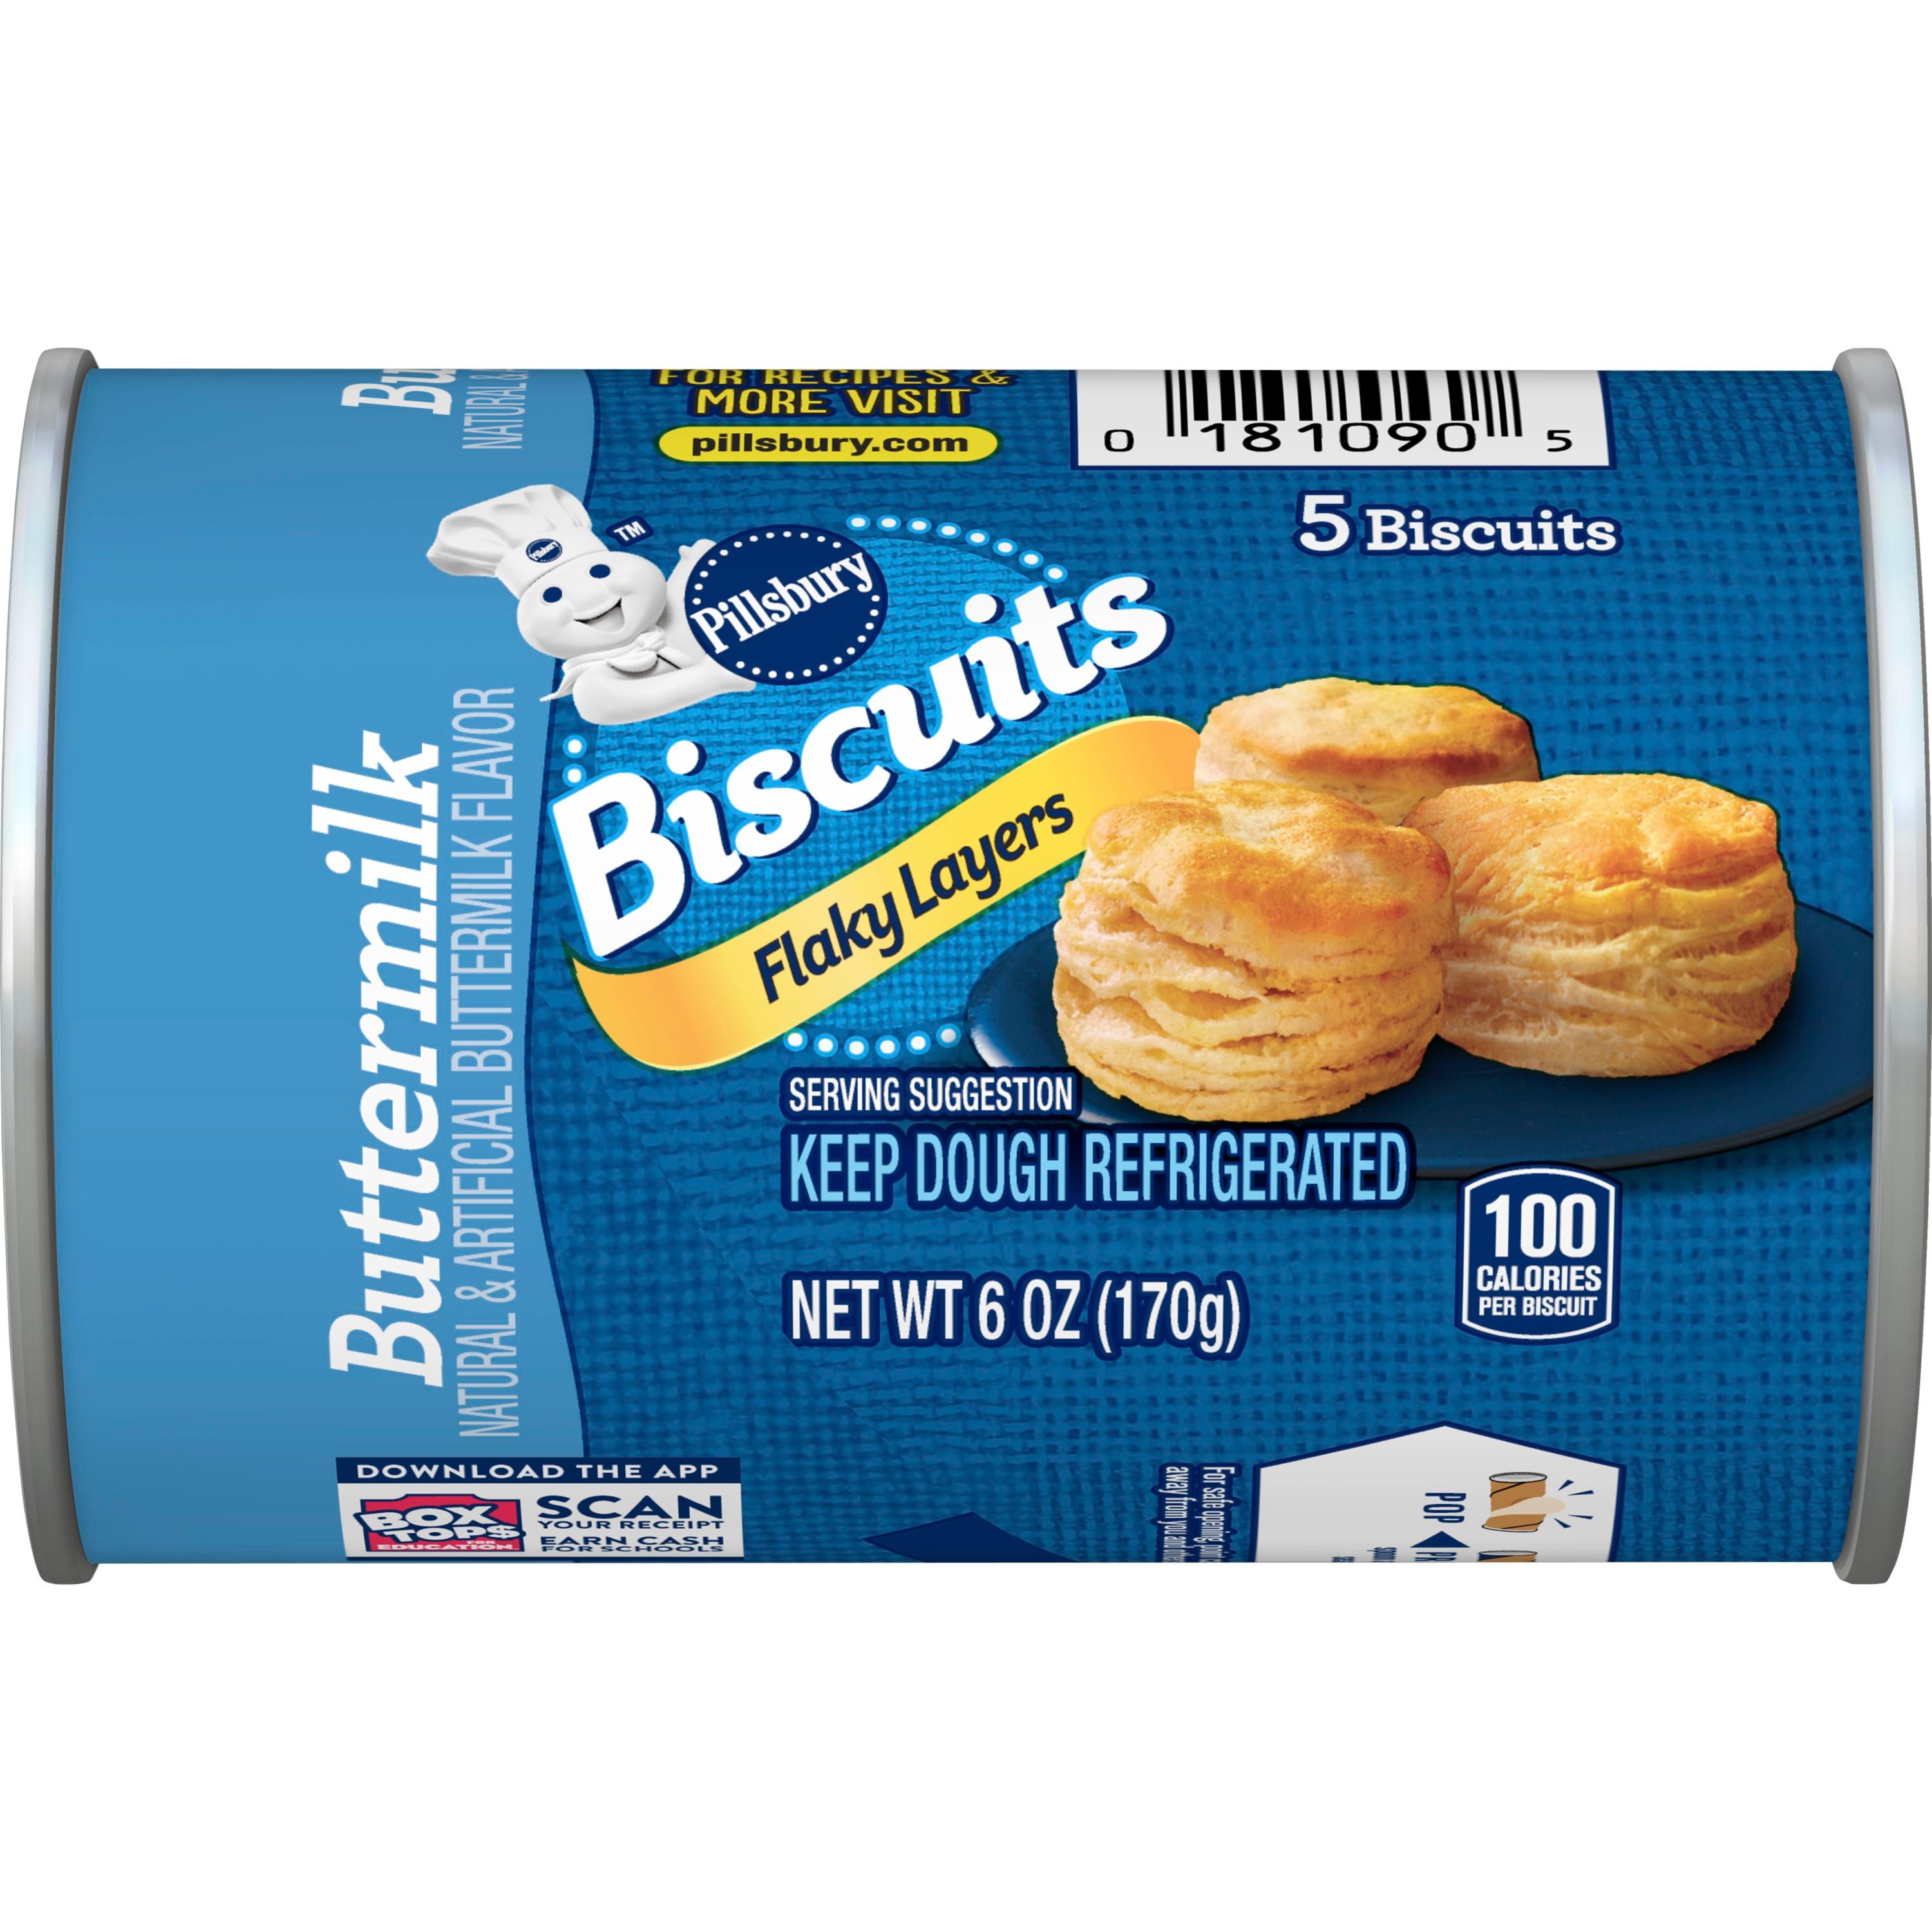 Pillsbury™ Flaky Layers Buttermilk Biscuits 5 ct - Front